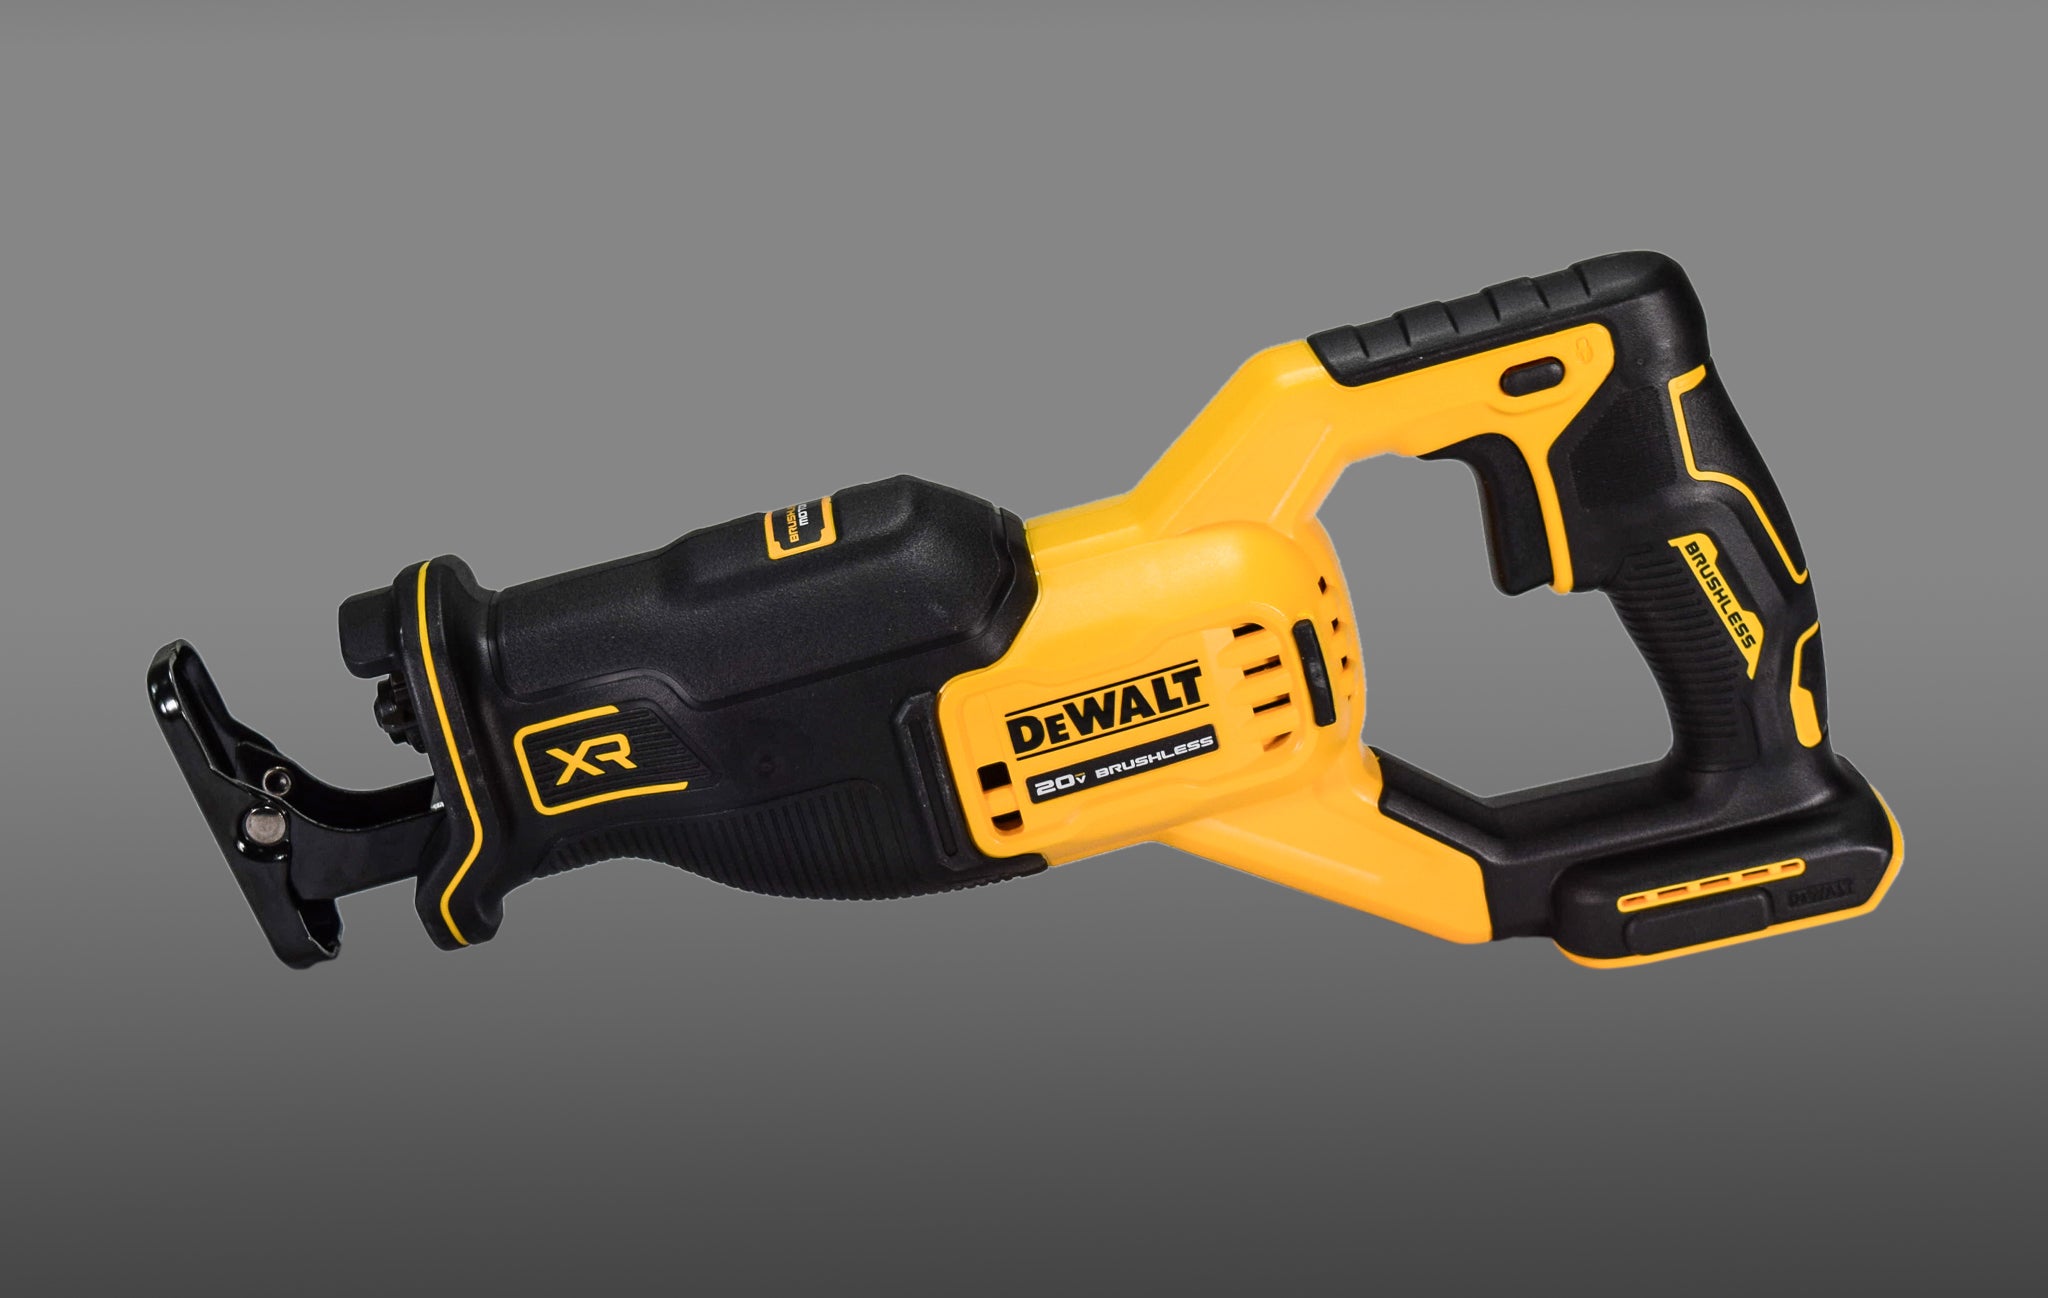 Dewalt-DCS382B-20-Volt-MAX-Cordless-Brushless-Reciprocating-Saw-Tool-Only-image-1